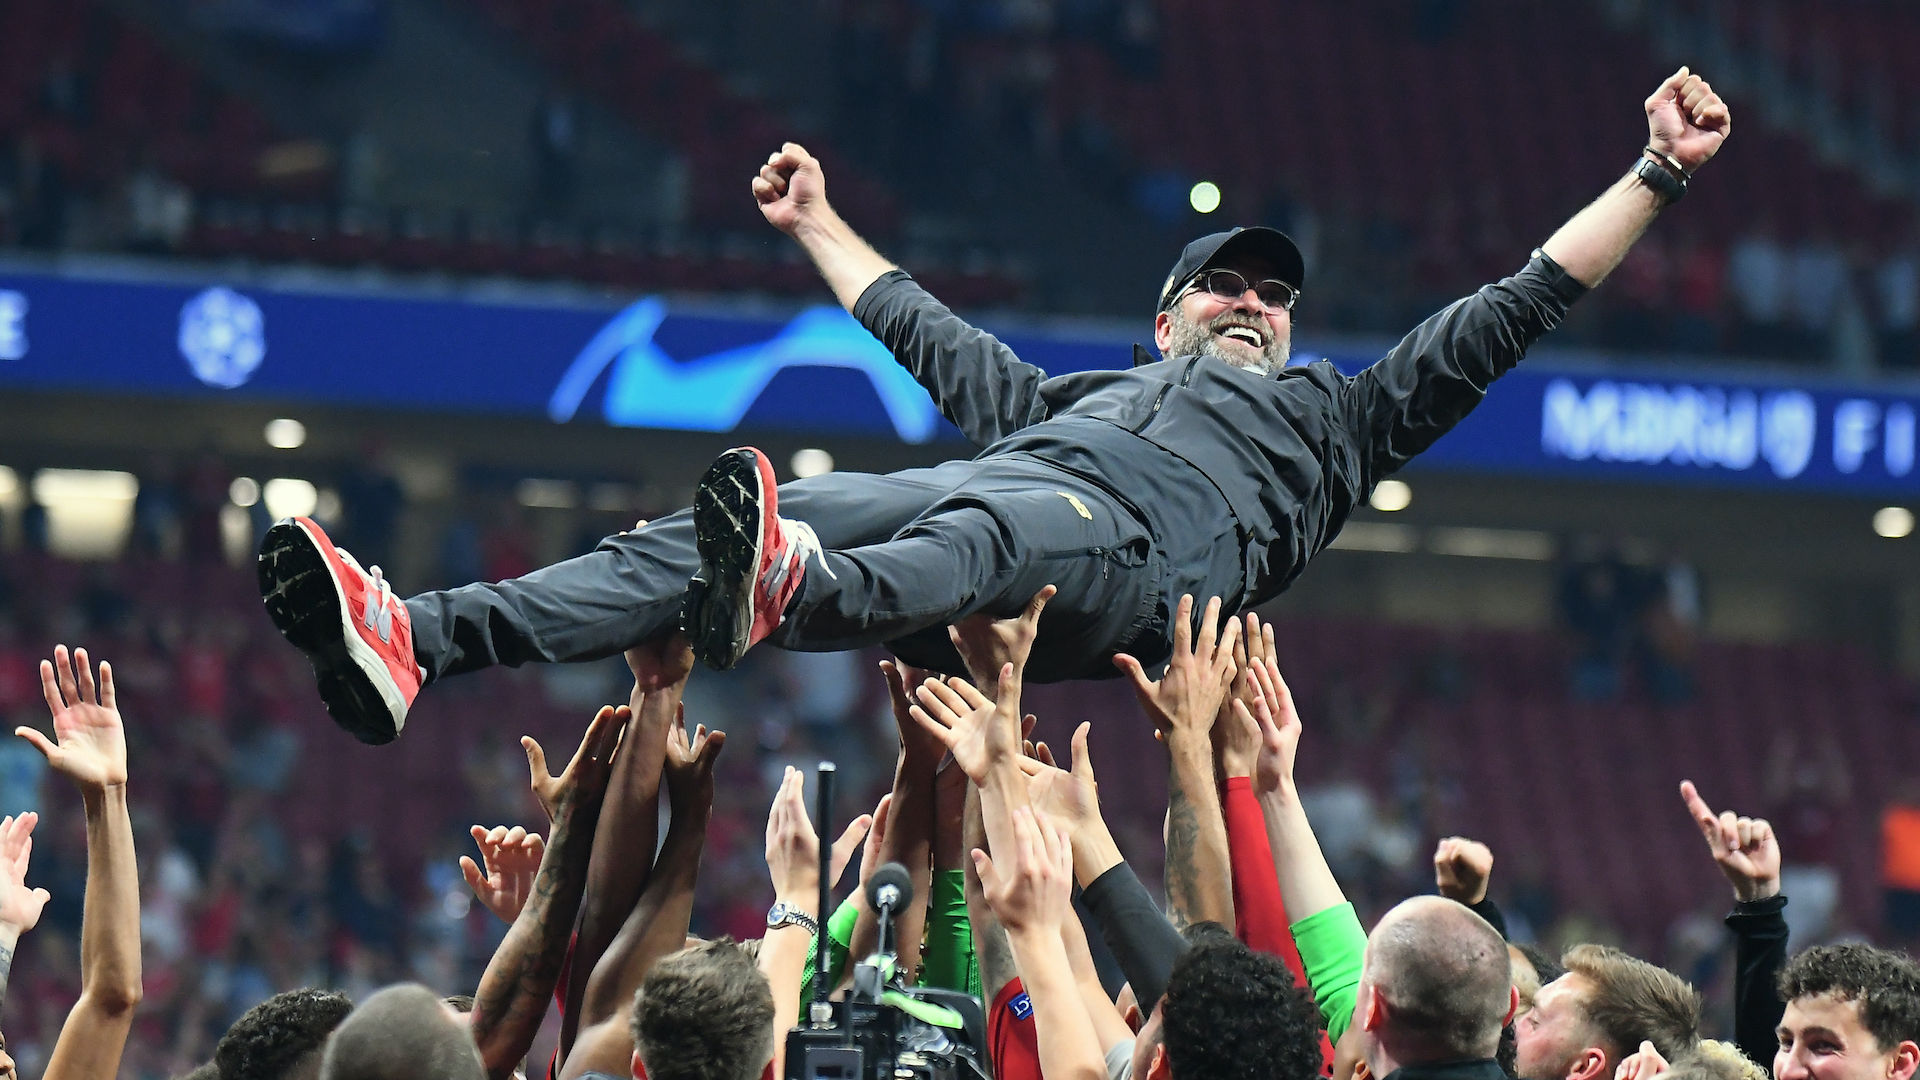 Liverpool manager Jurgen Klopp is thrown in the air after the award ceremony held after the 2018/19 UEFA Champions League Final.